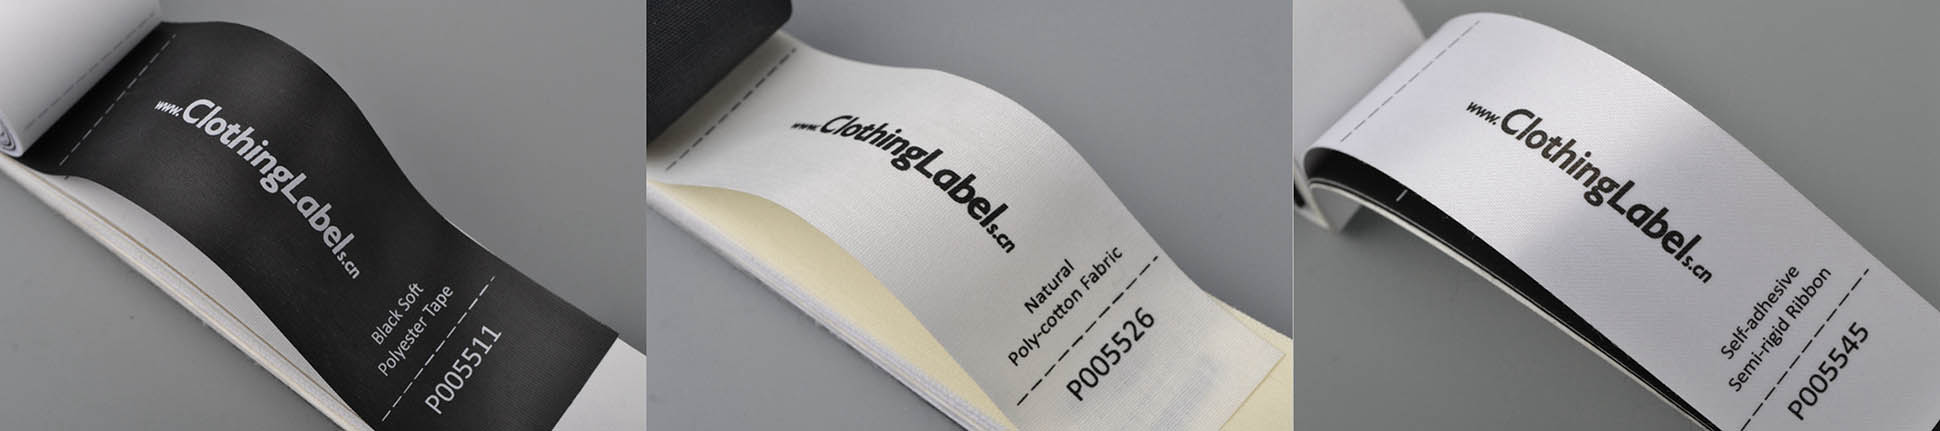 clothing label material samples